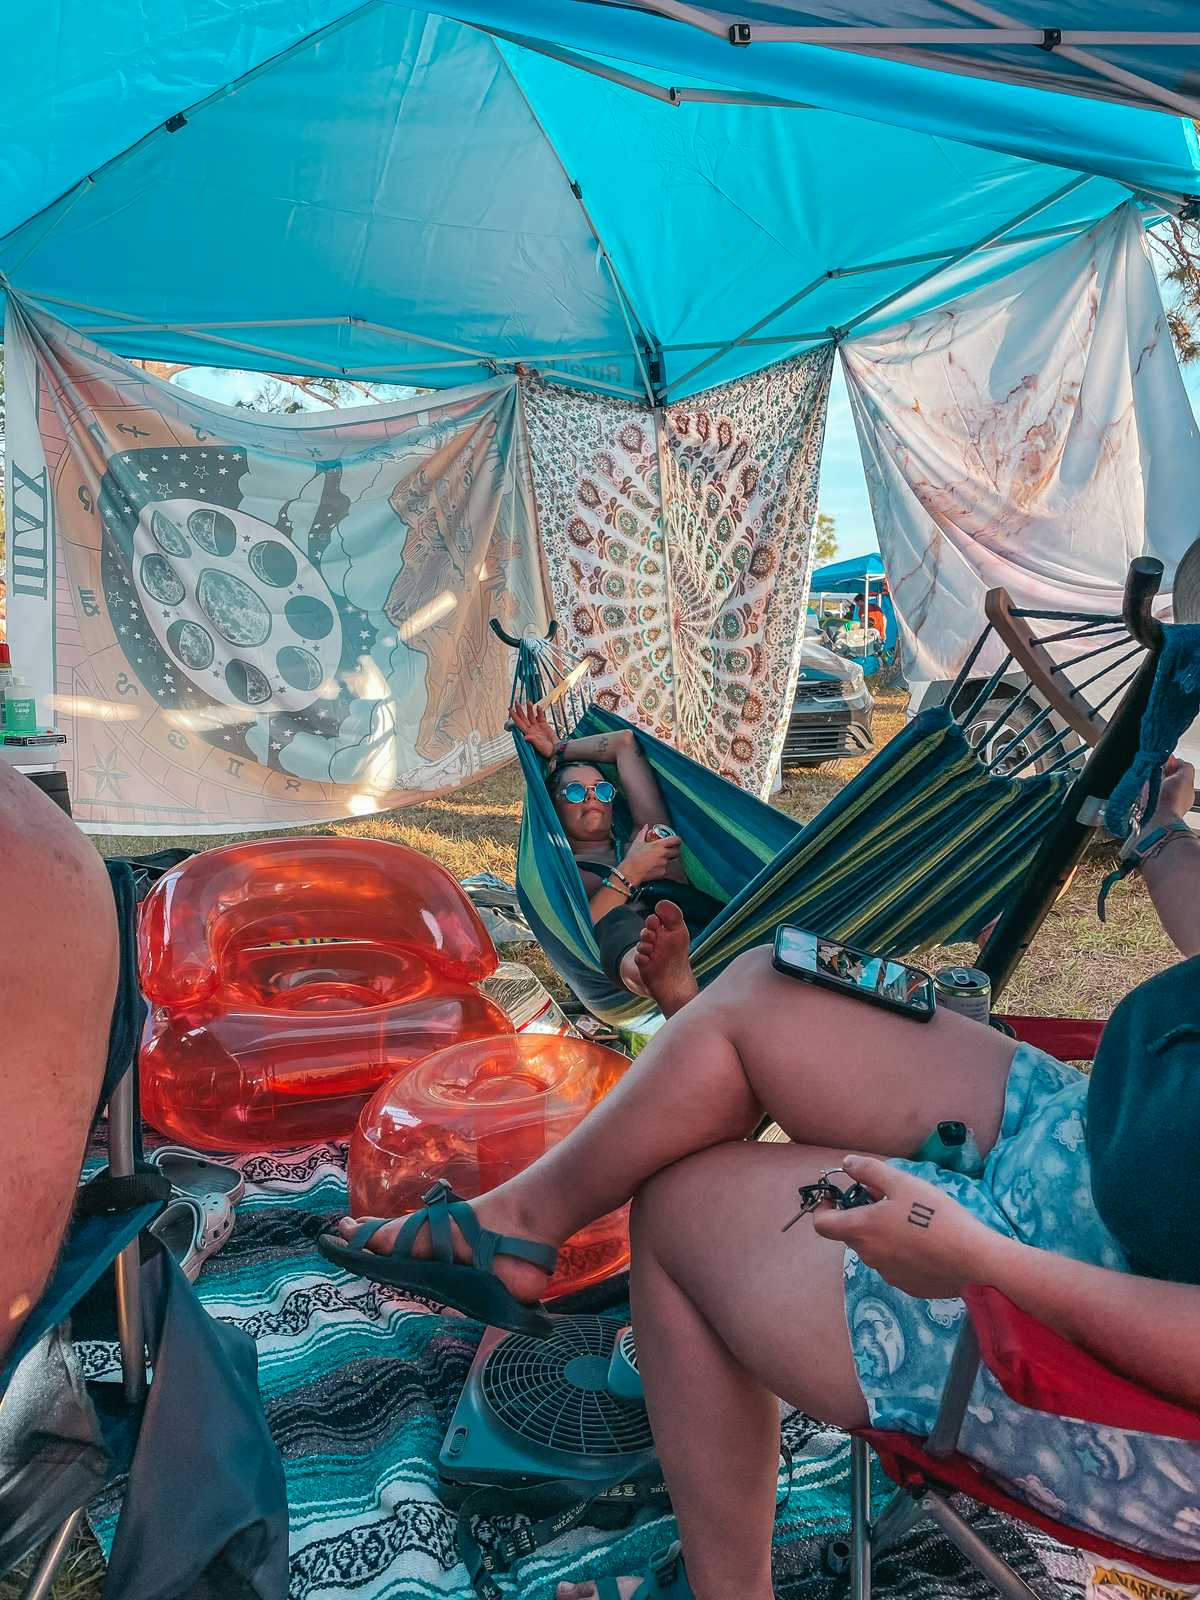 Destiny Snyder laying down on a hammock and sharing camping festival packing list